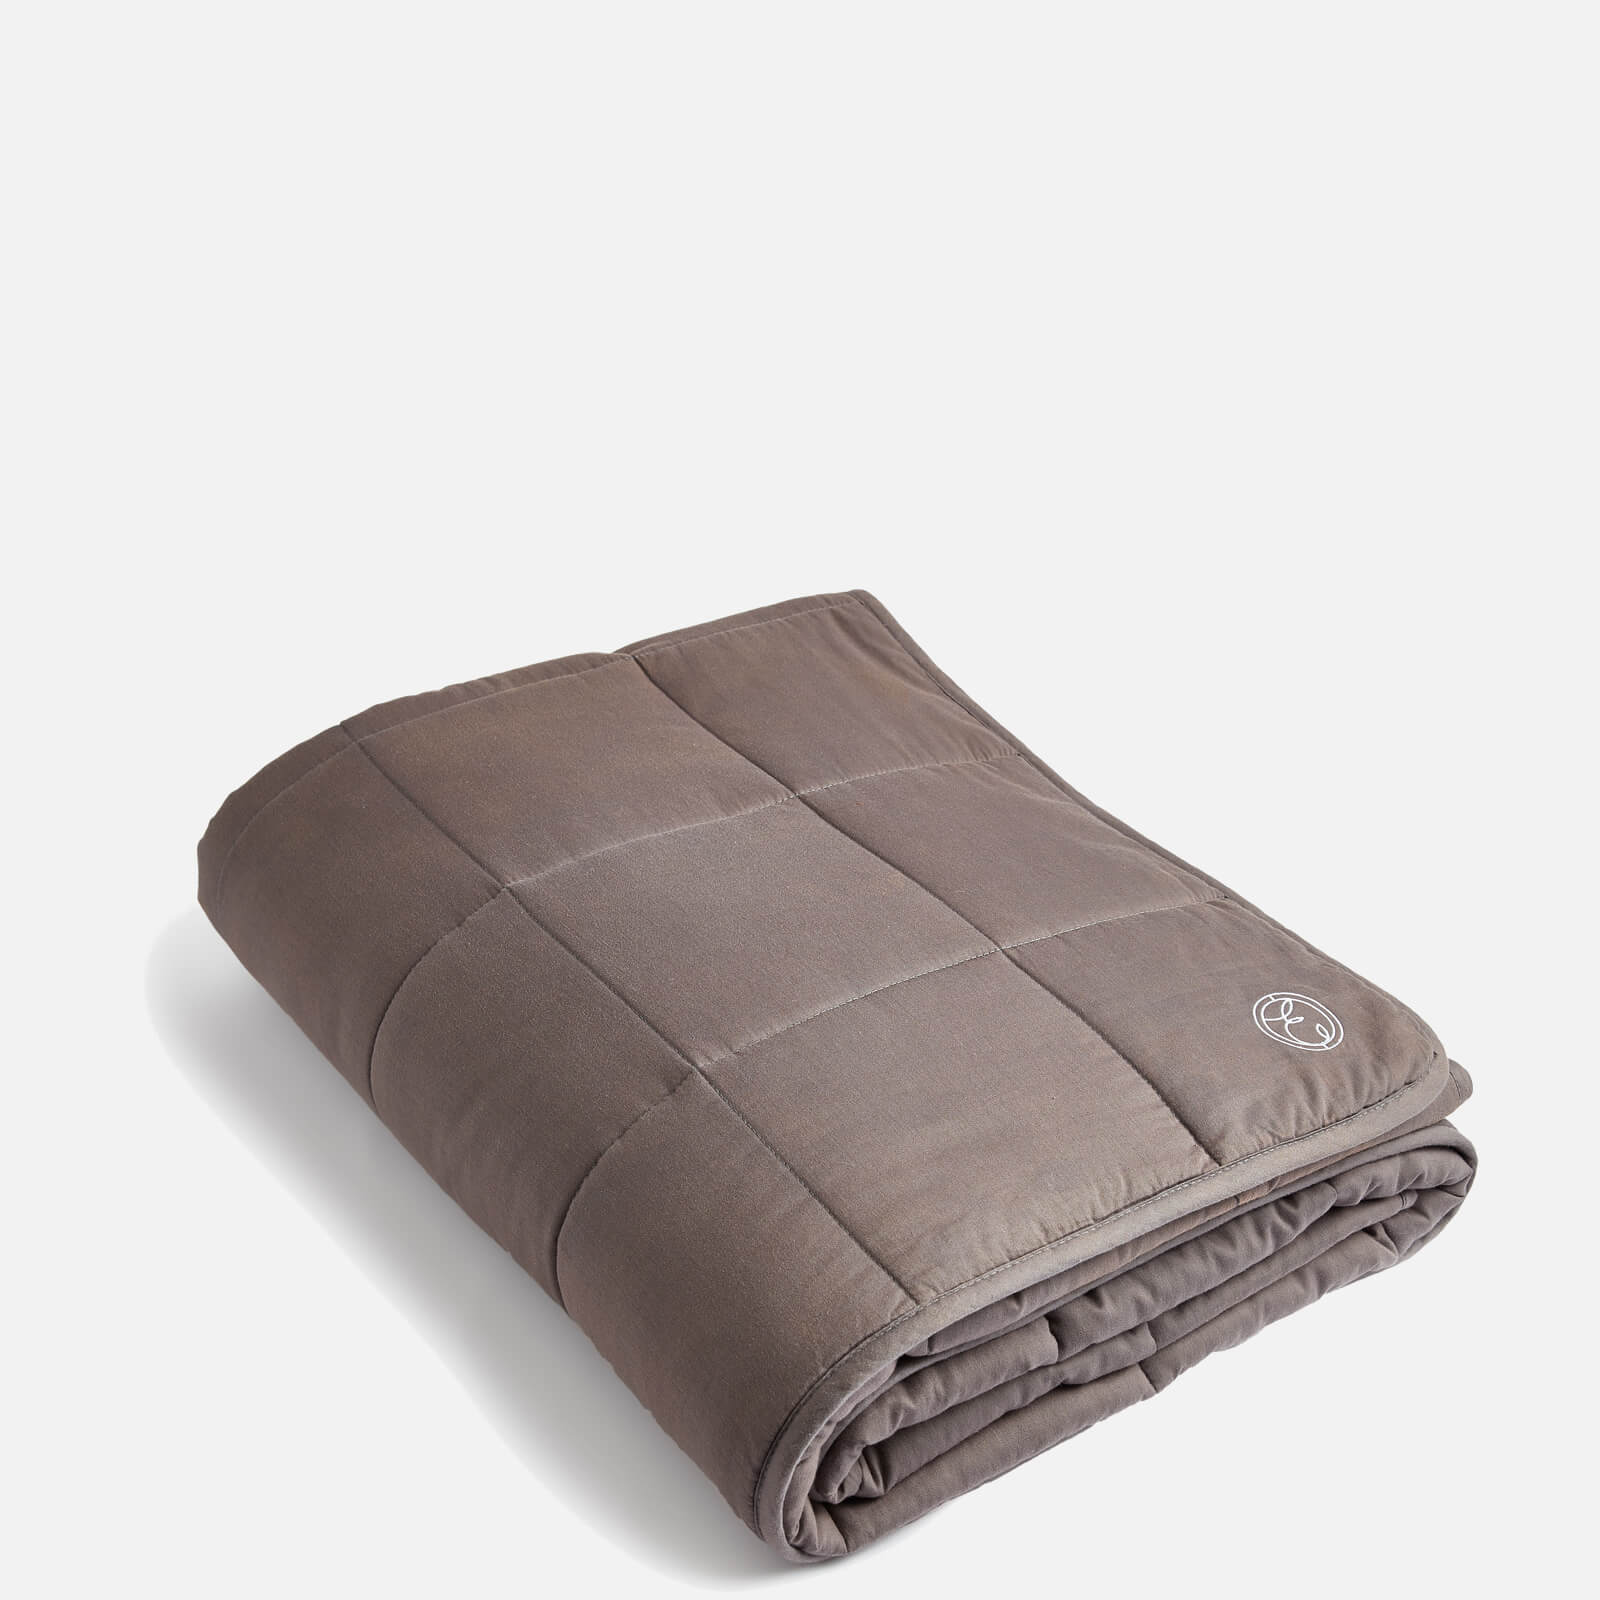 ESPA Home Weighted Blanket - Grey - 7kg